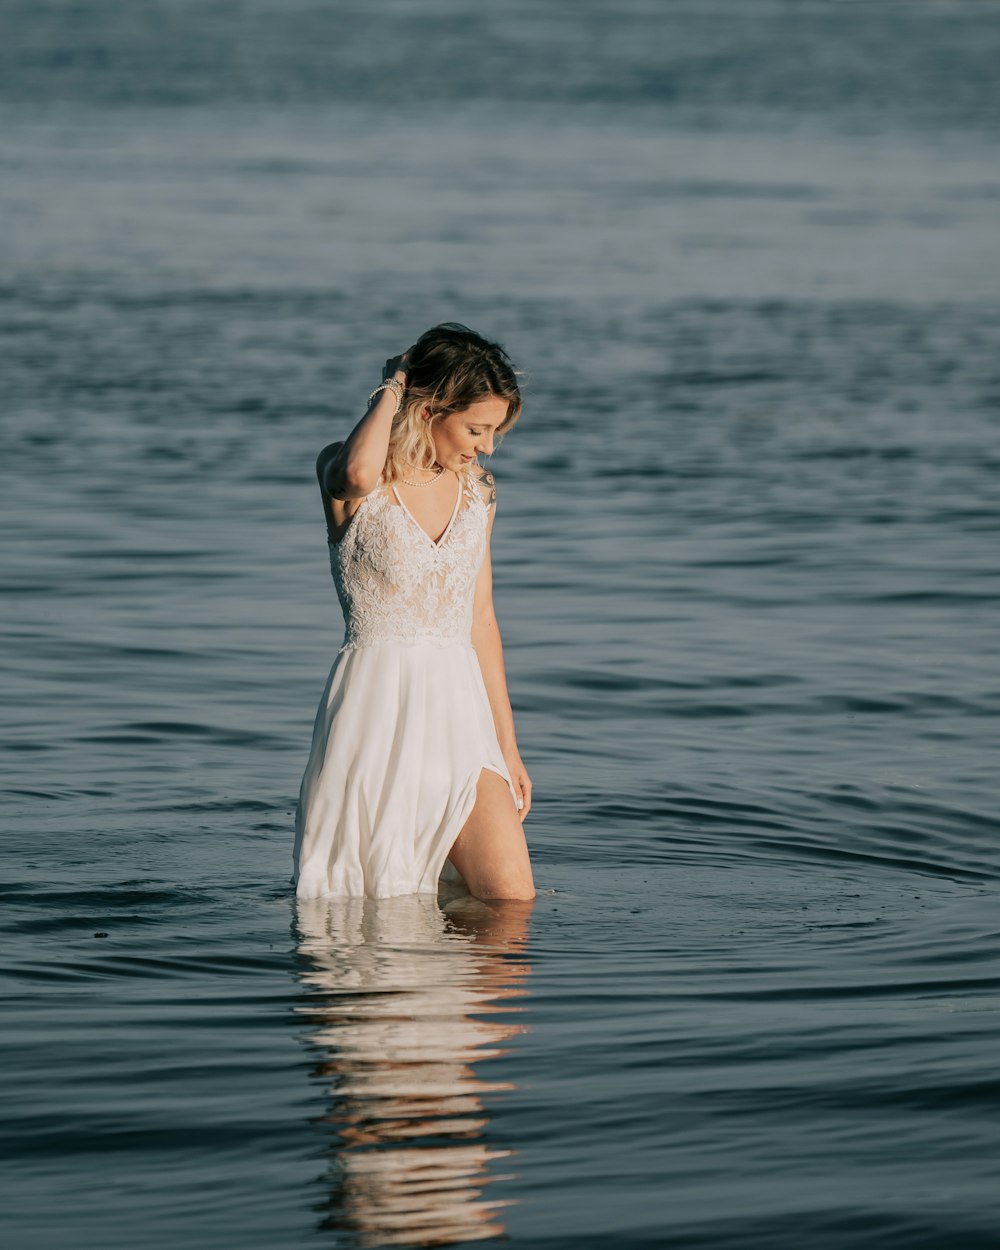 a person in a white dress standing in water